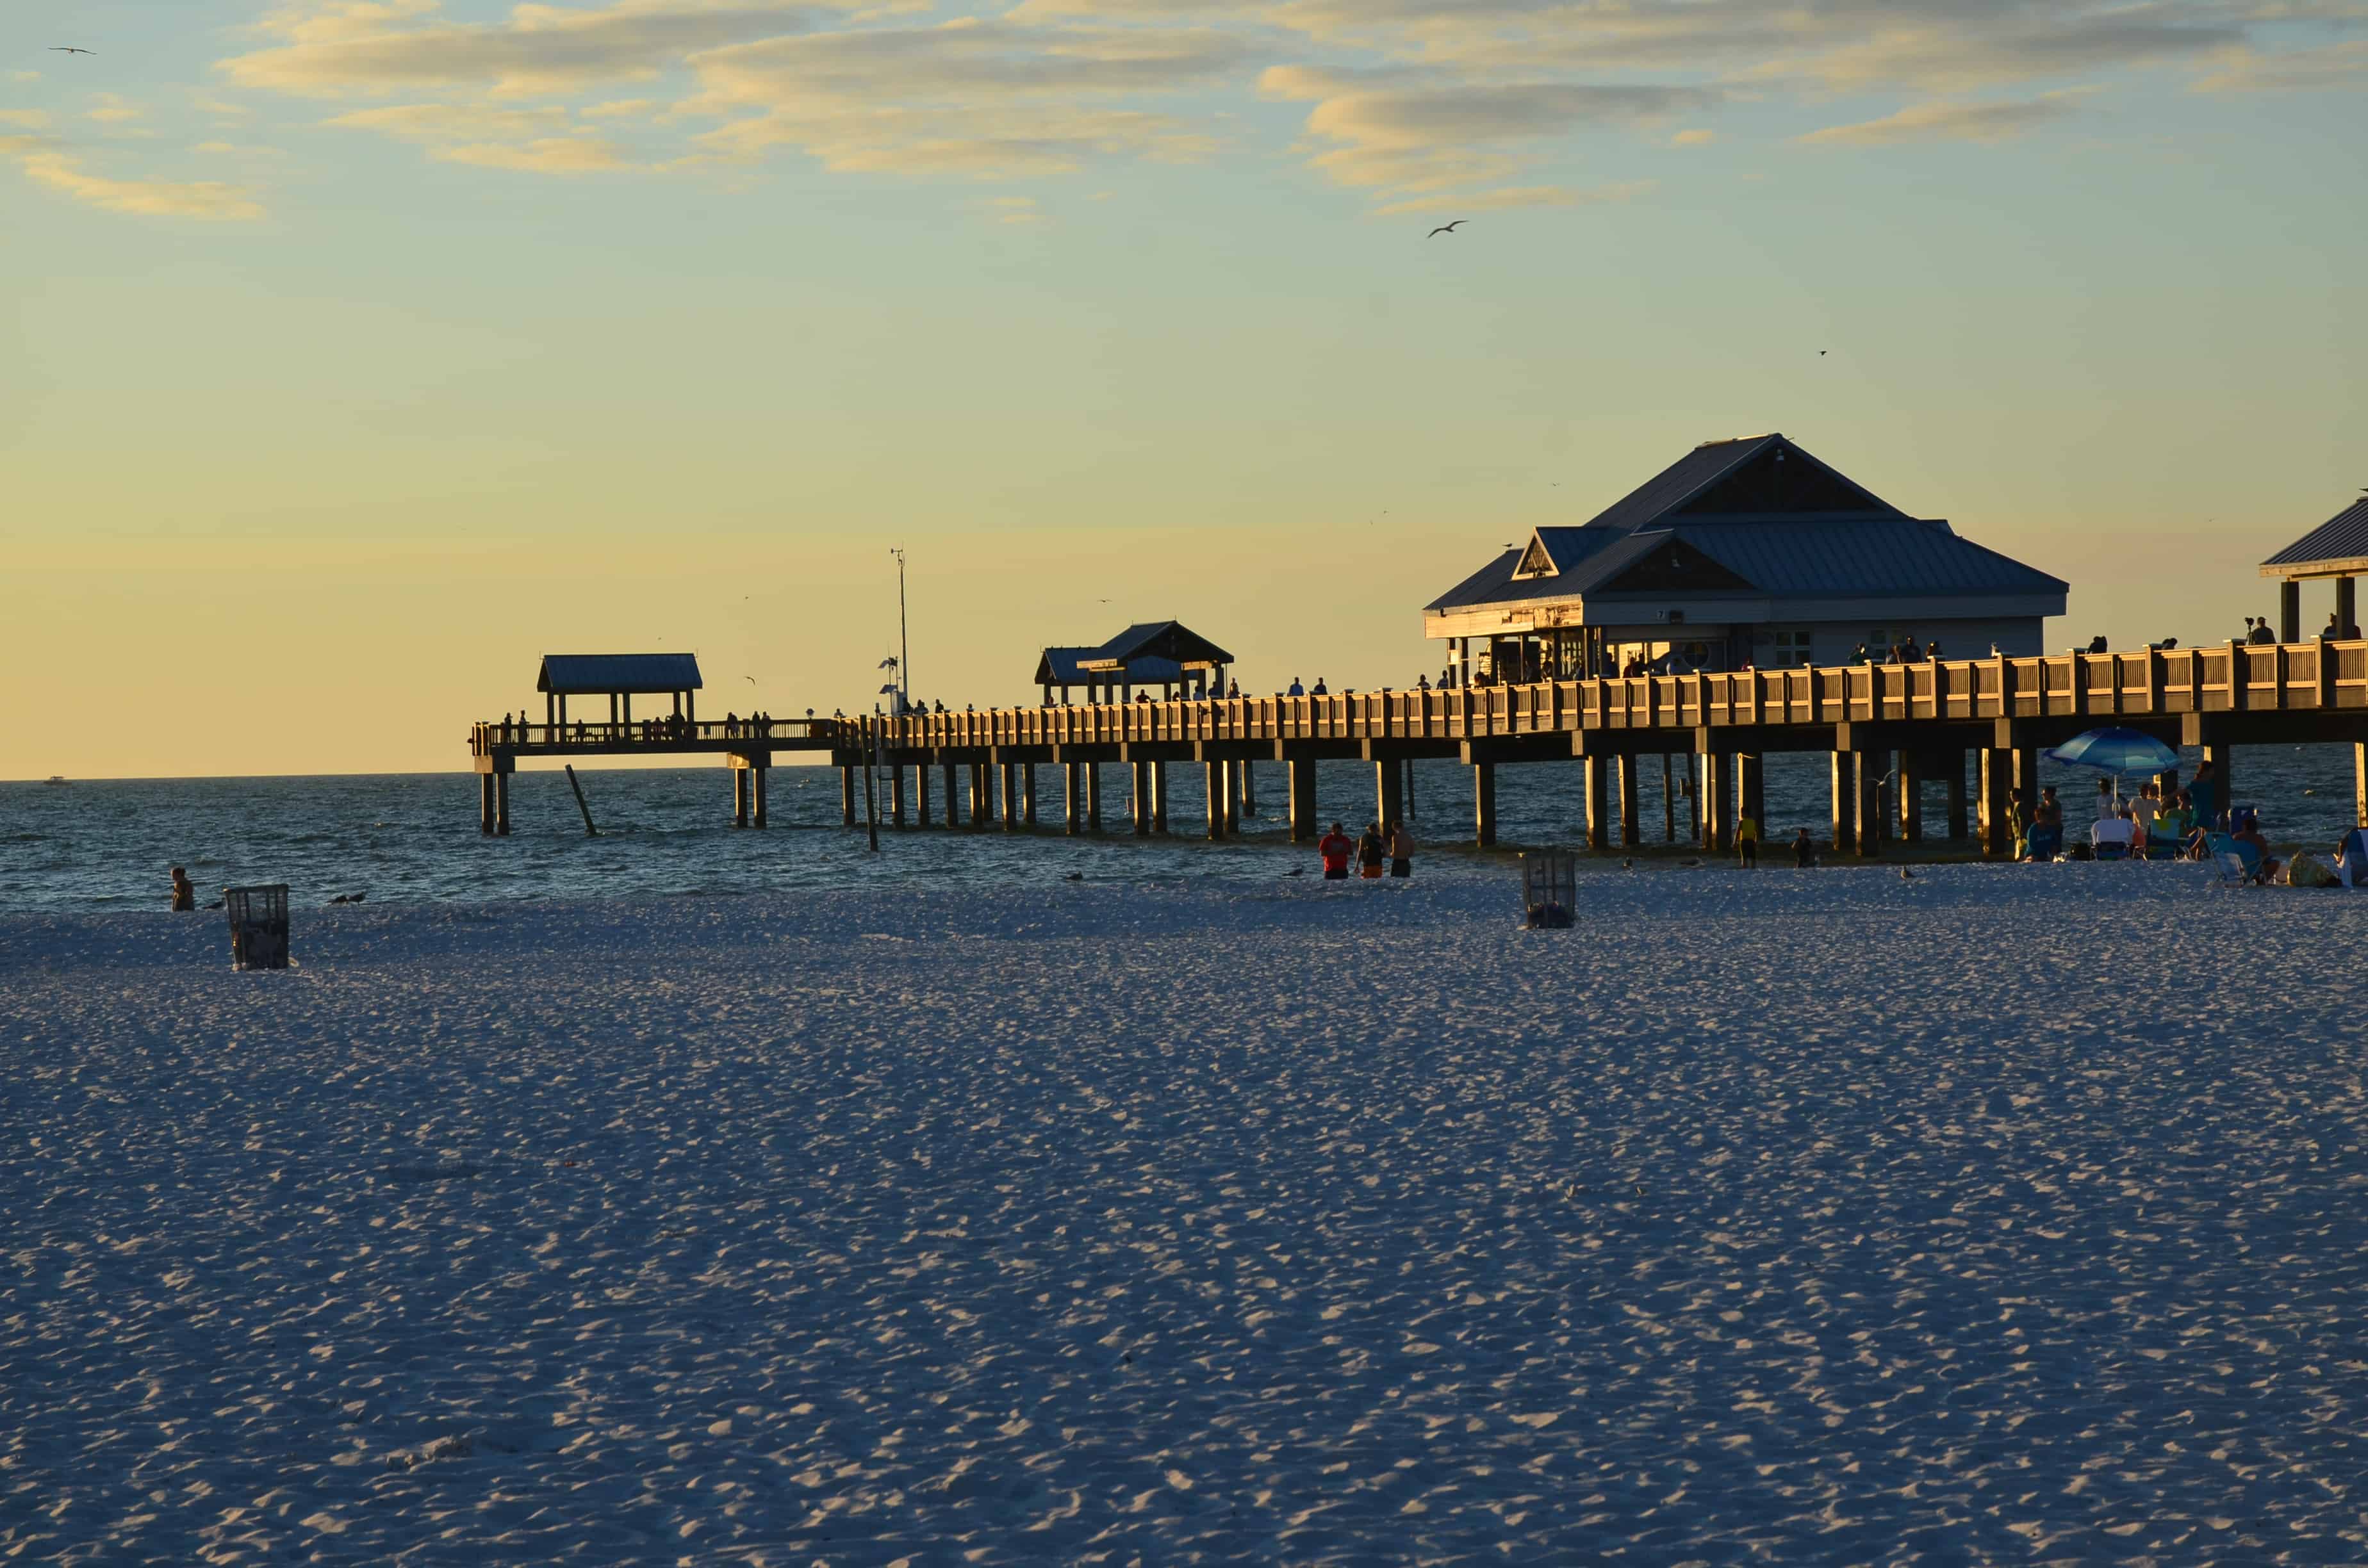 Pier 60 at Clearwater Beach, Florida